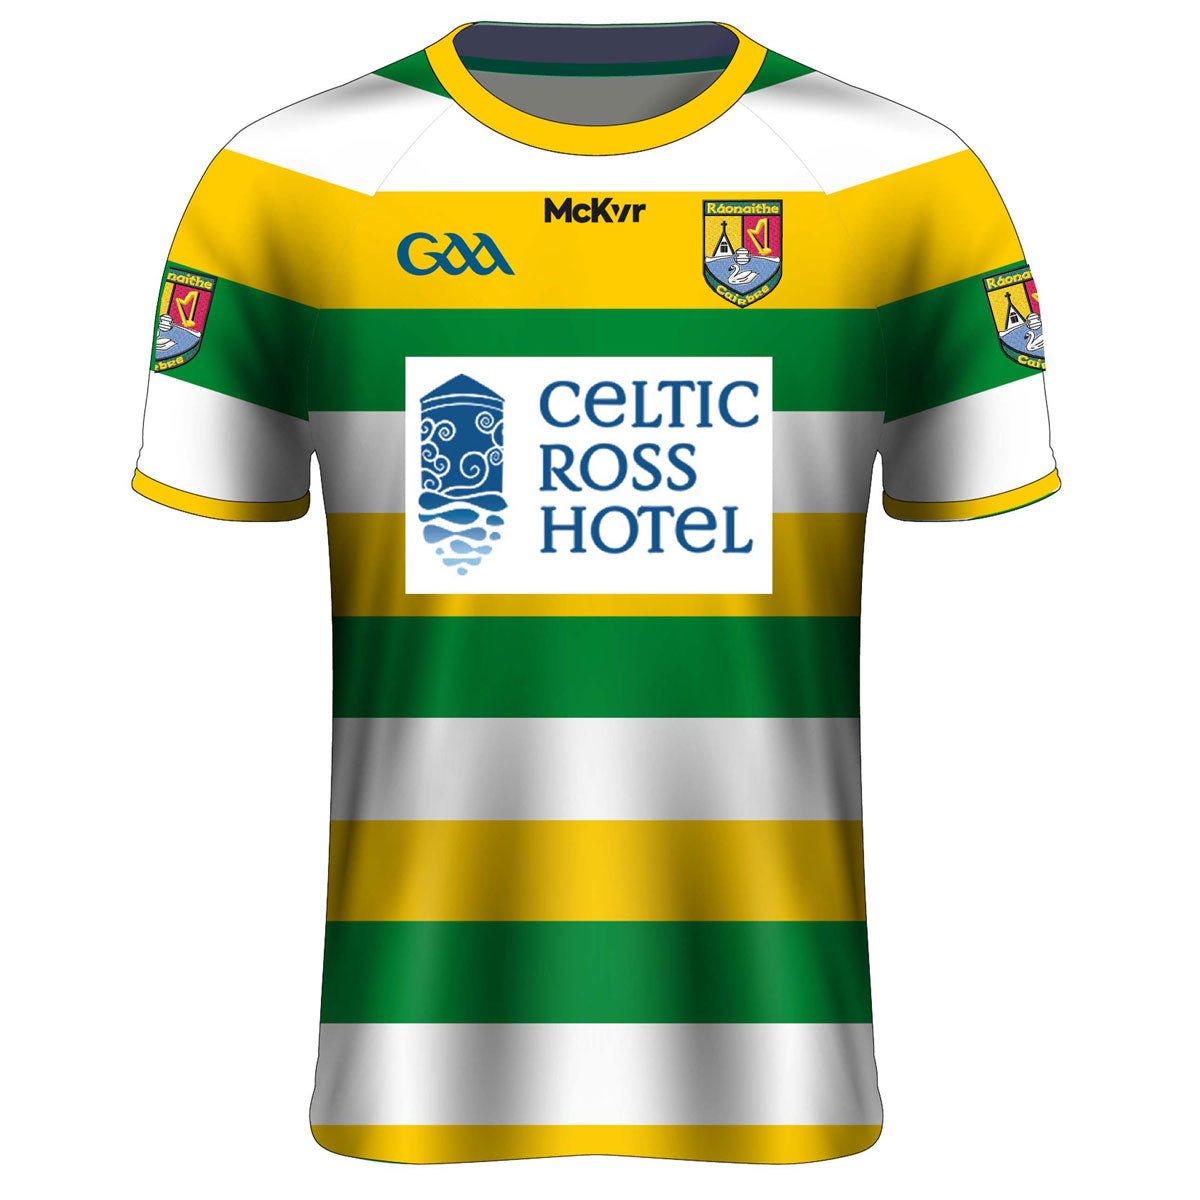 Mc Keever Carbery Rangers Playing Jersey - Adult - Green/Yellow/White